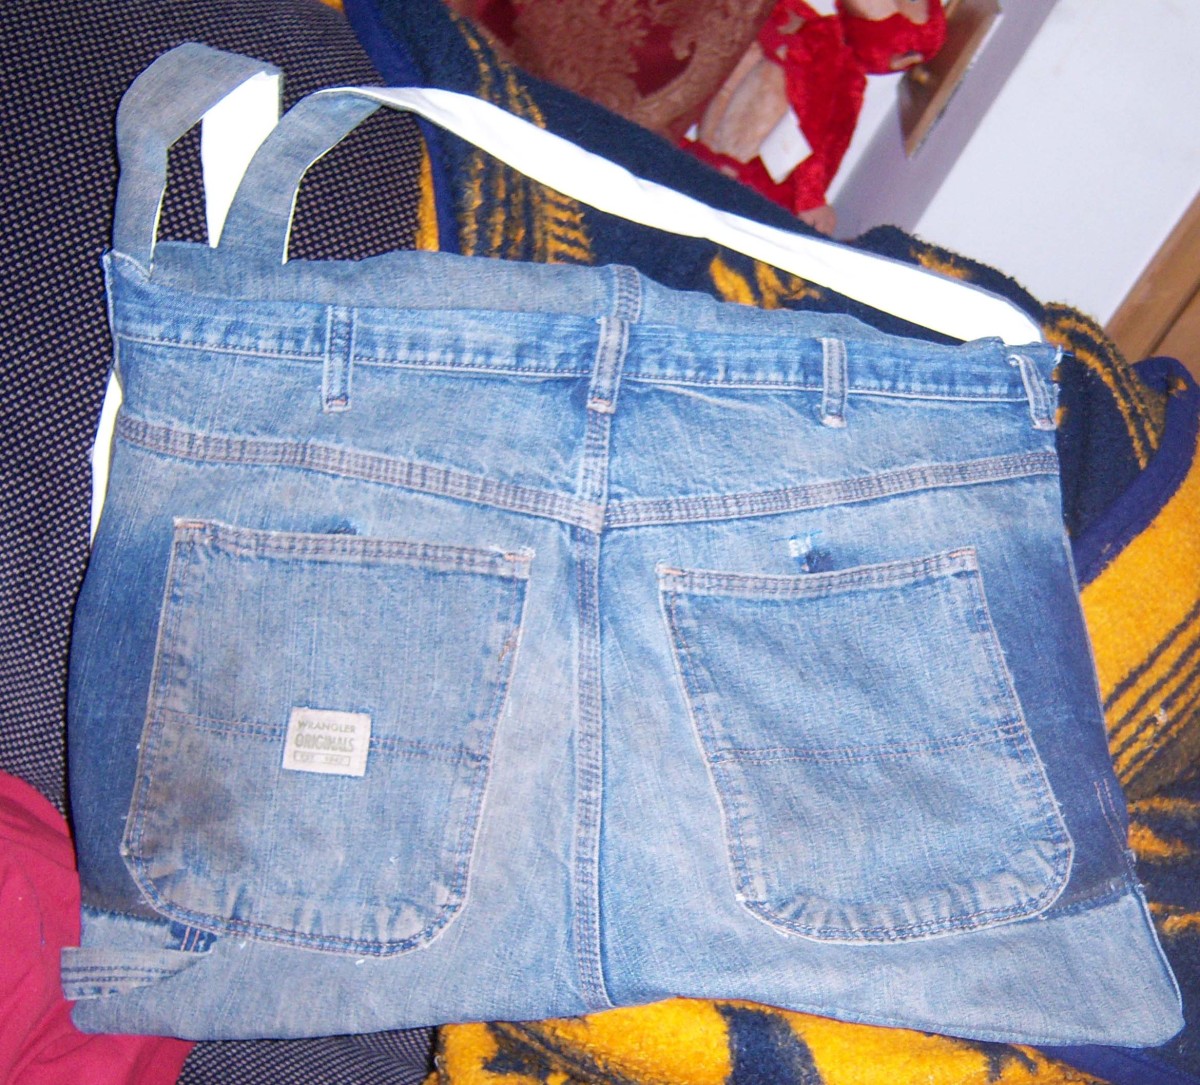 How To Make A Round Recycled Denim Bag